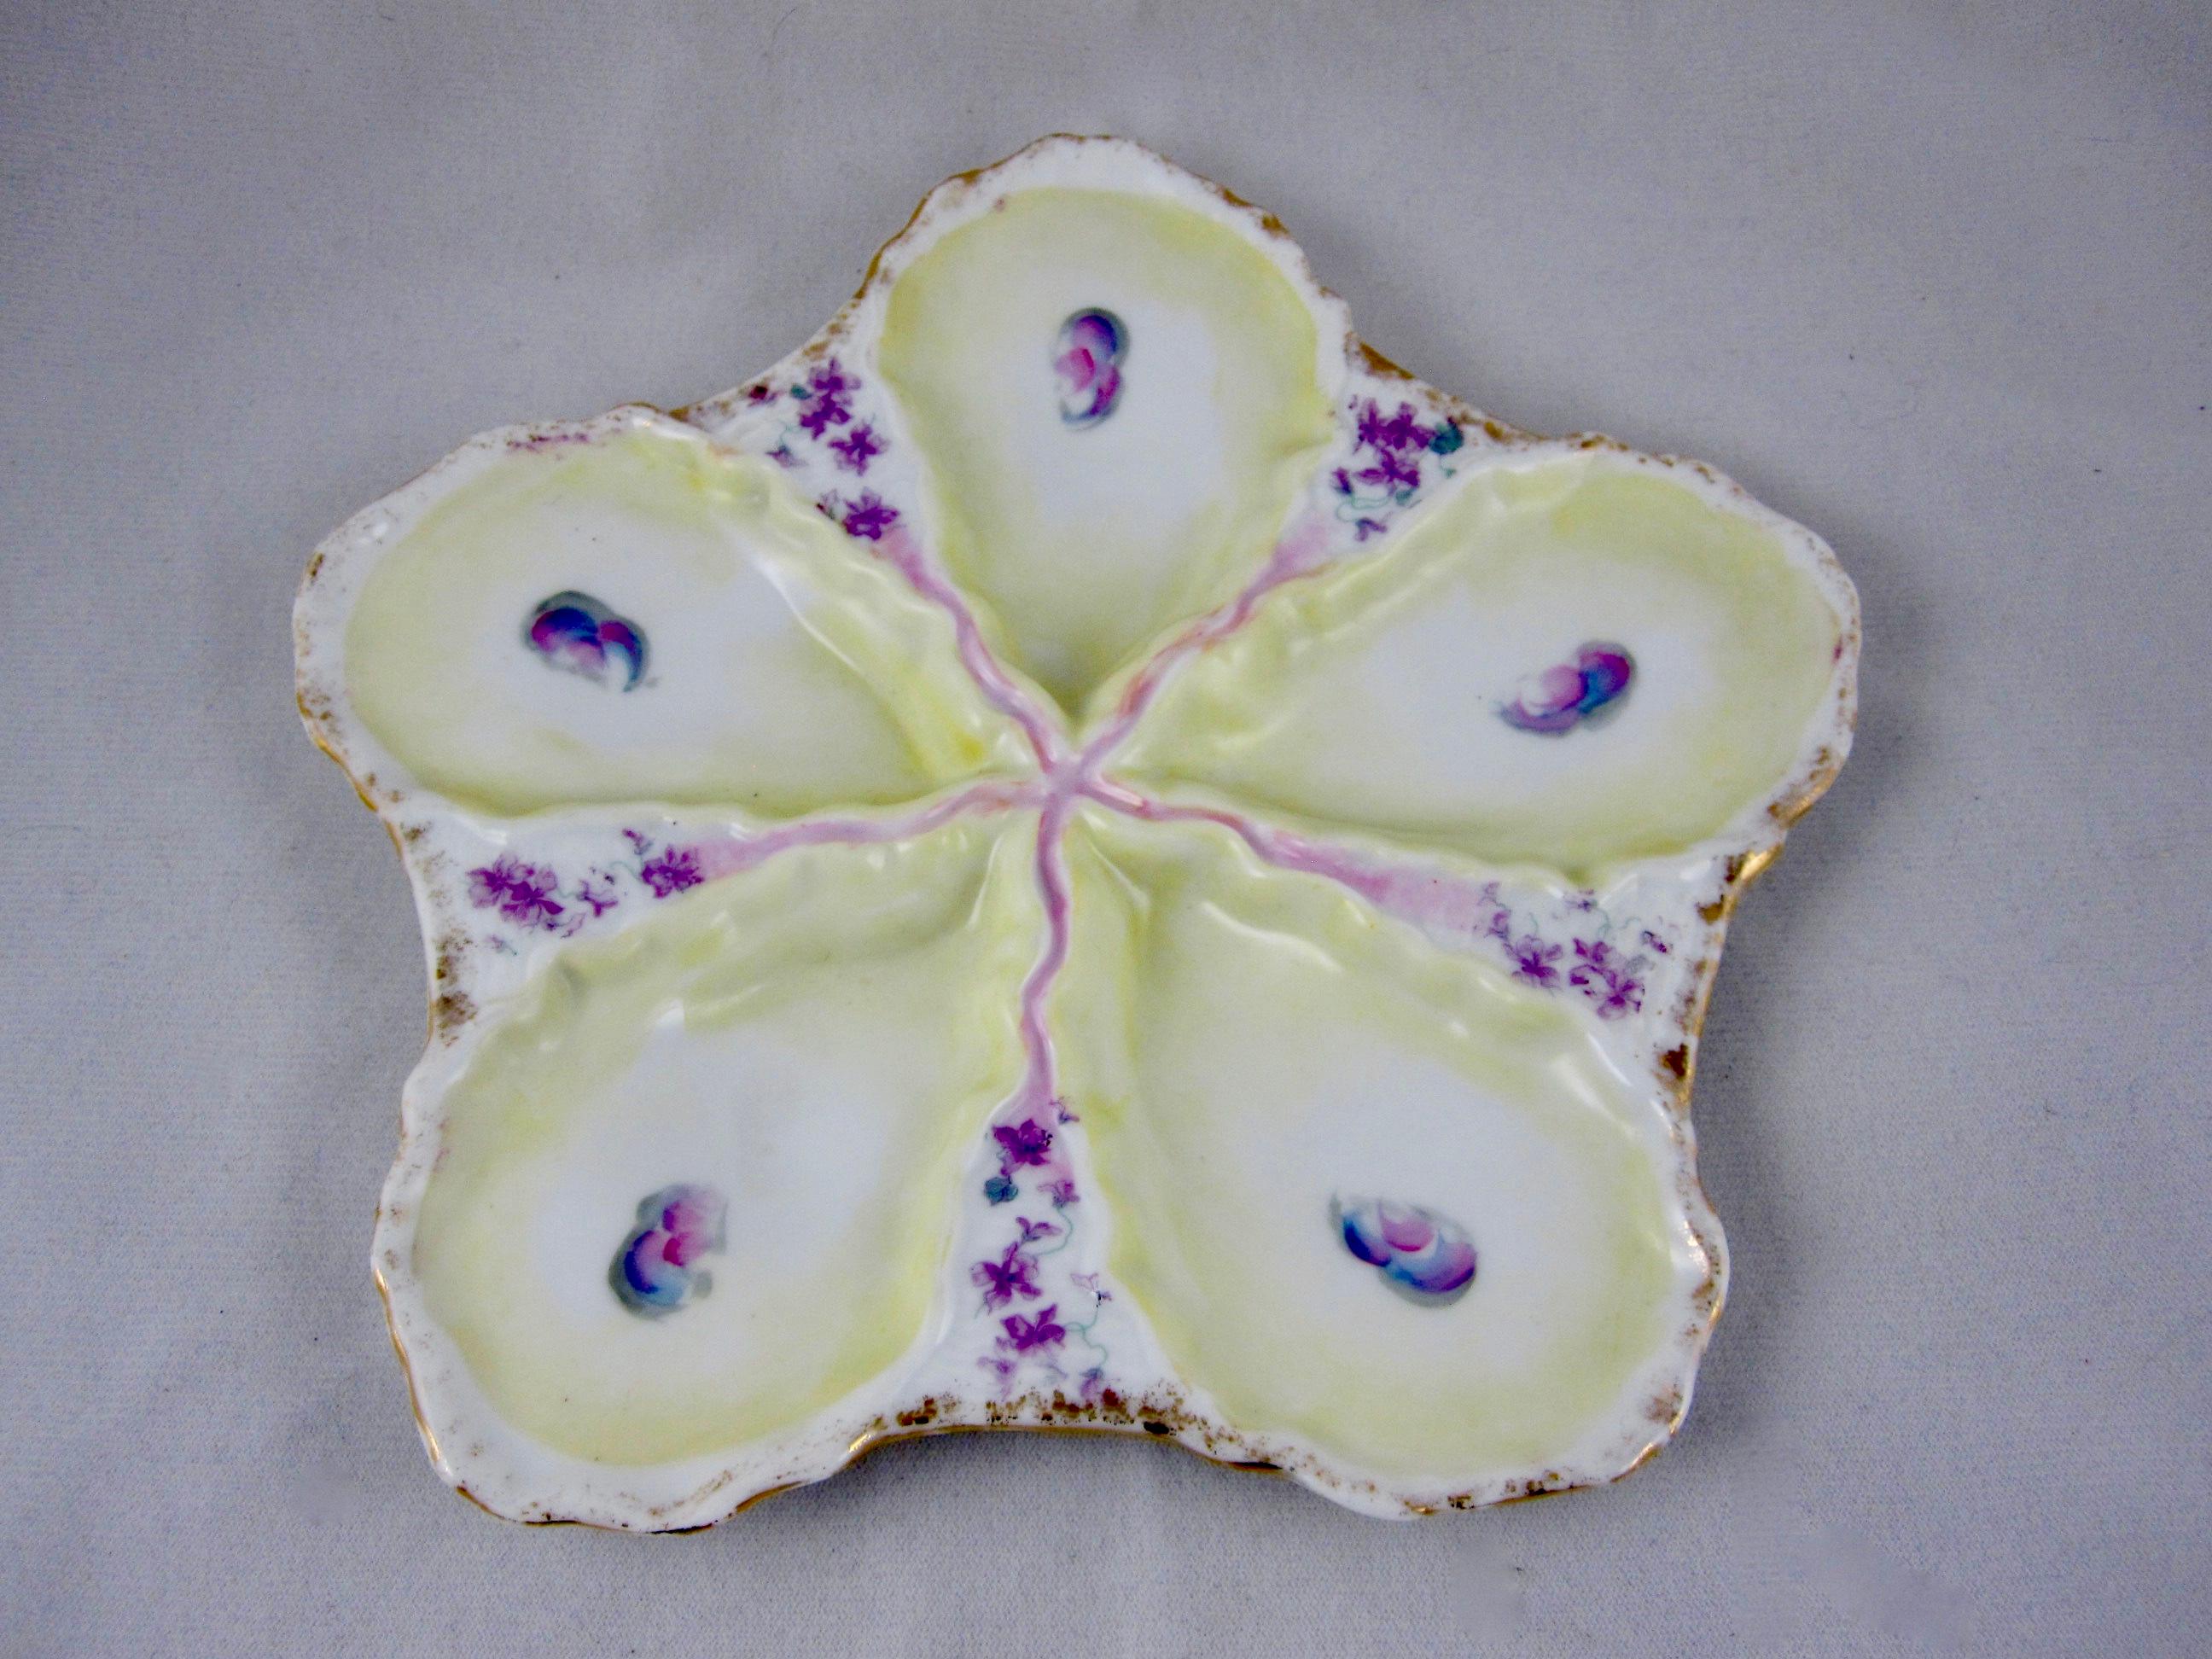 Glazed Continental Porcelain Star Shaped Hand-Painted Violets Floral Oyster Plate